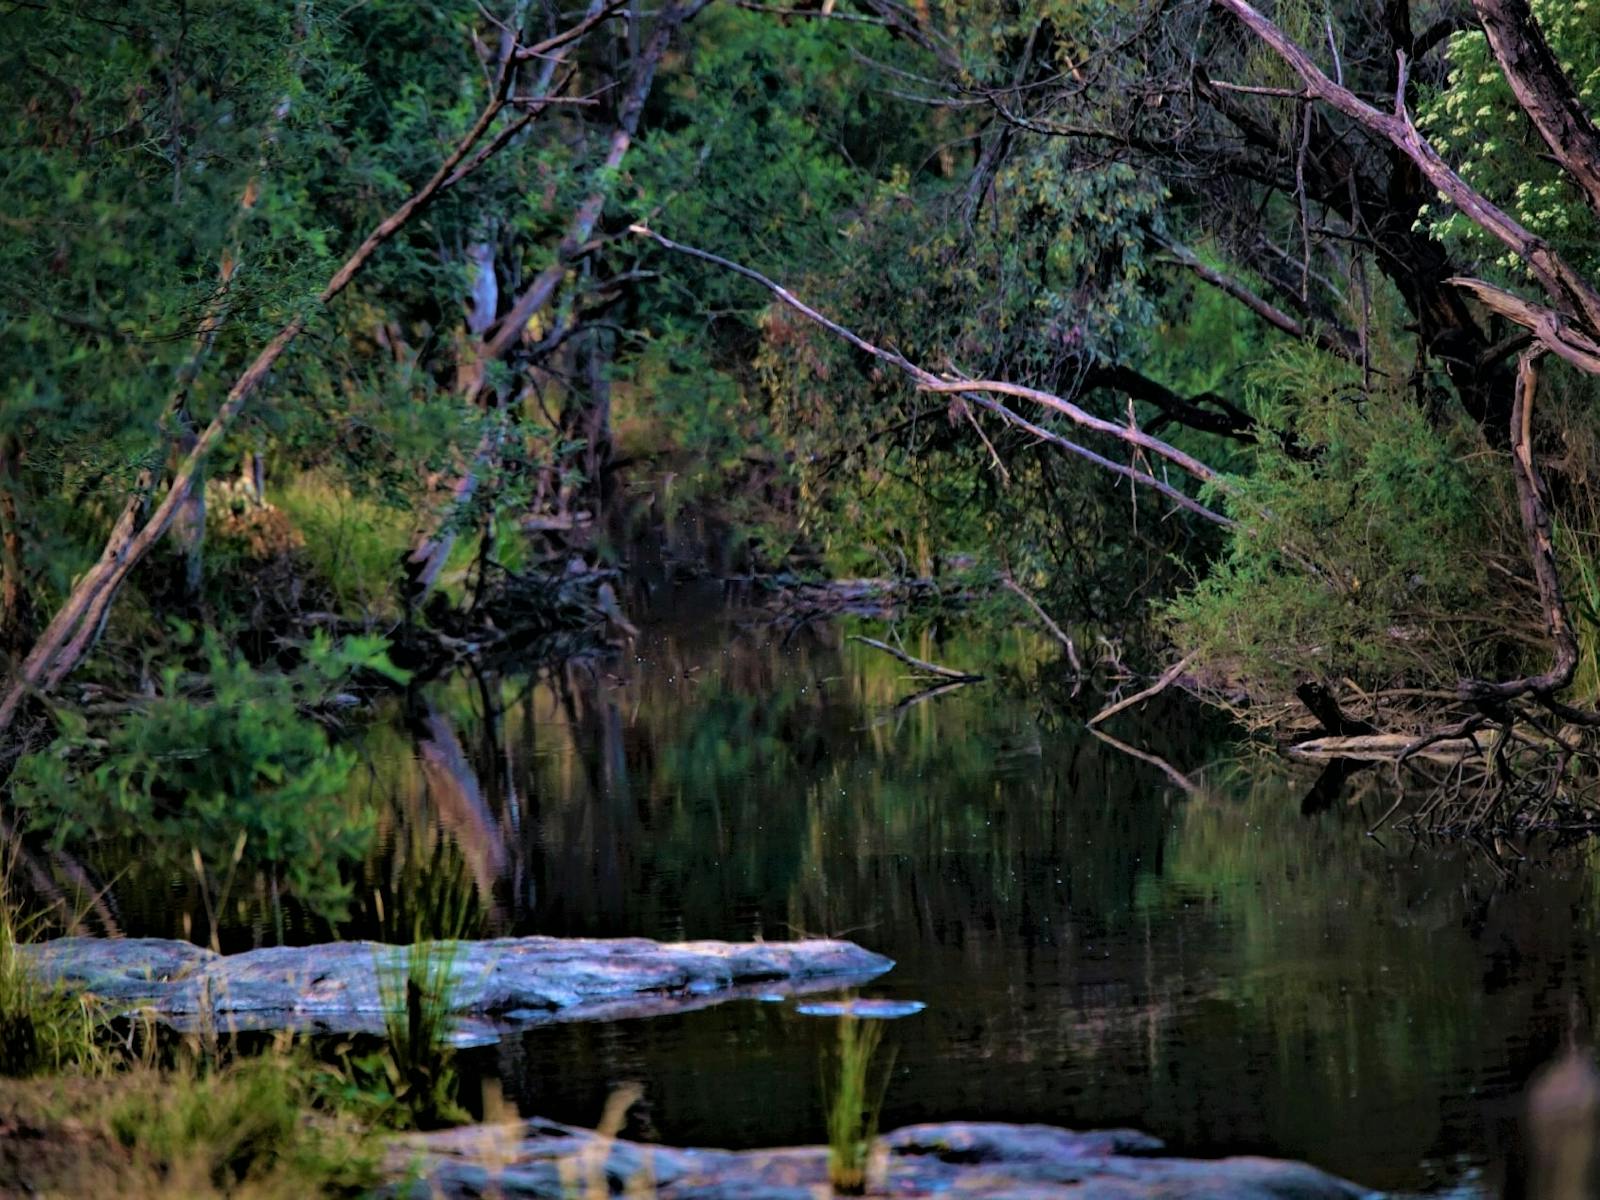 This picture is of beautiful King Parrot Creek surrounded by trees